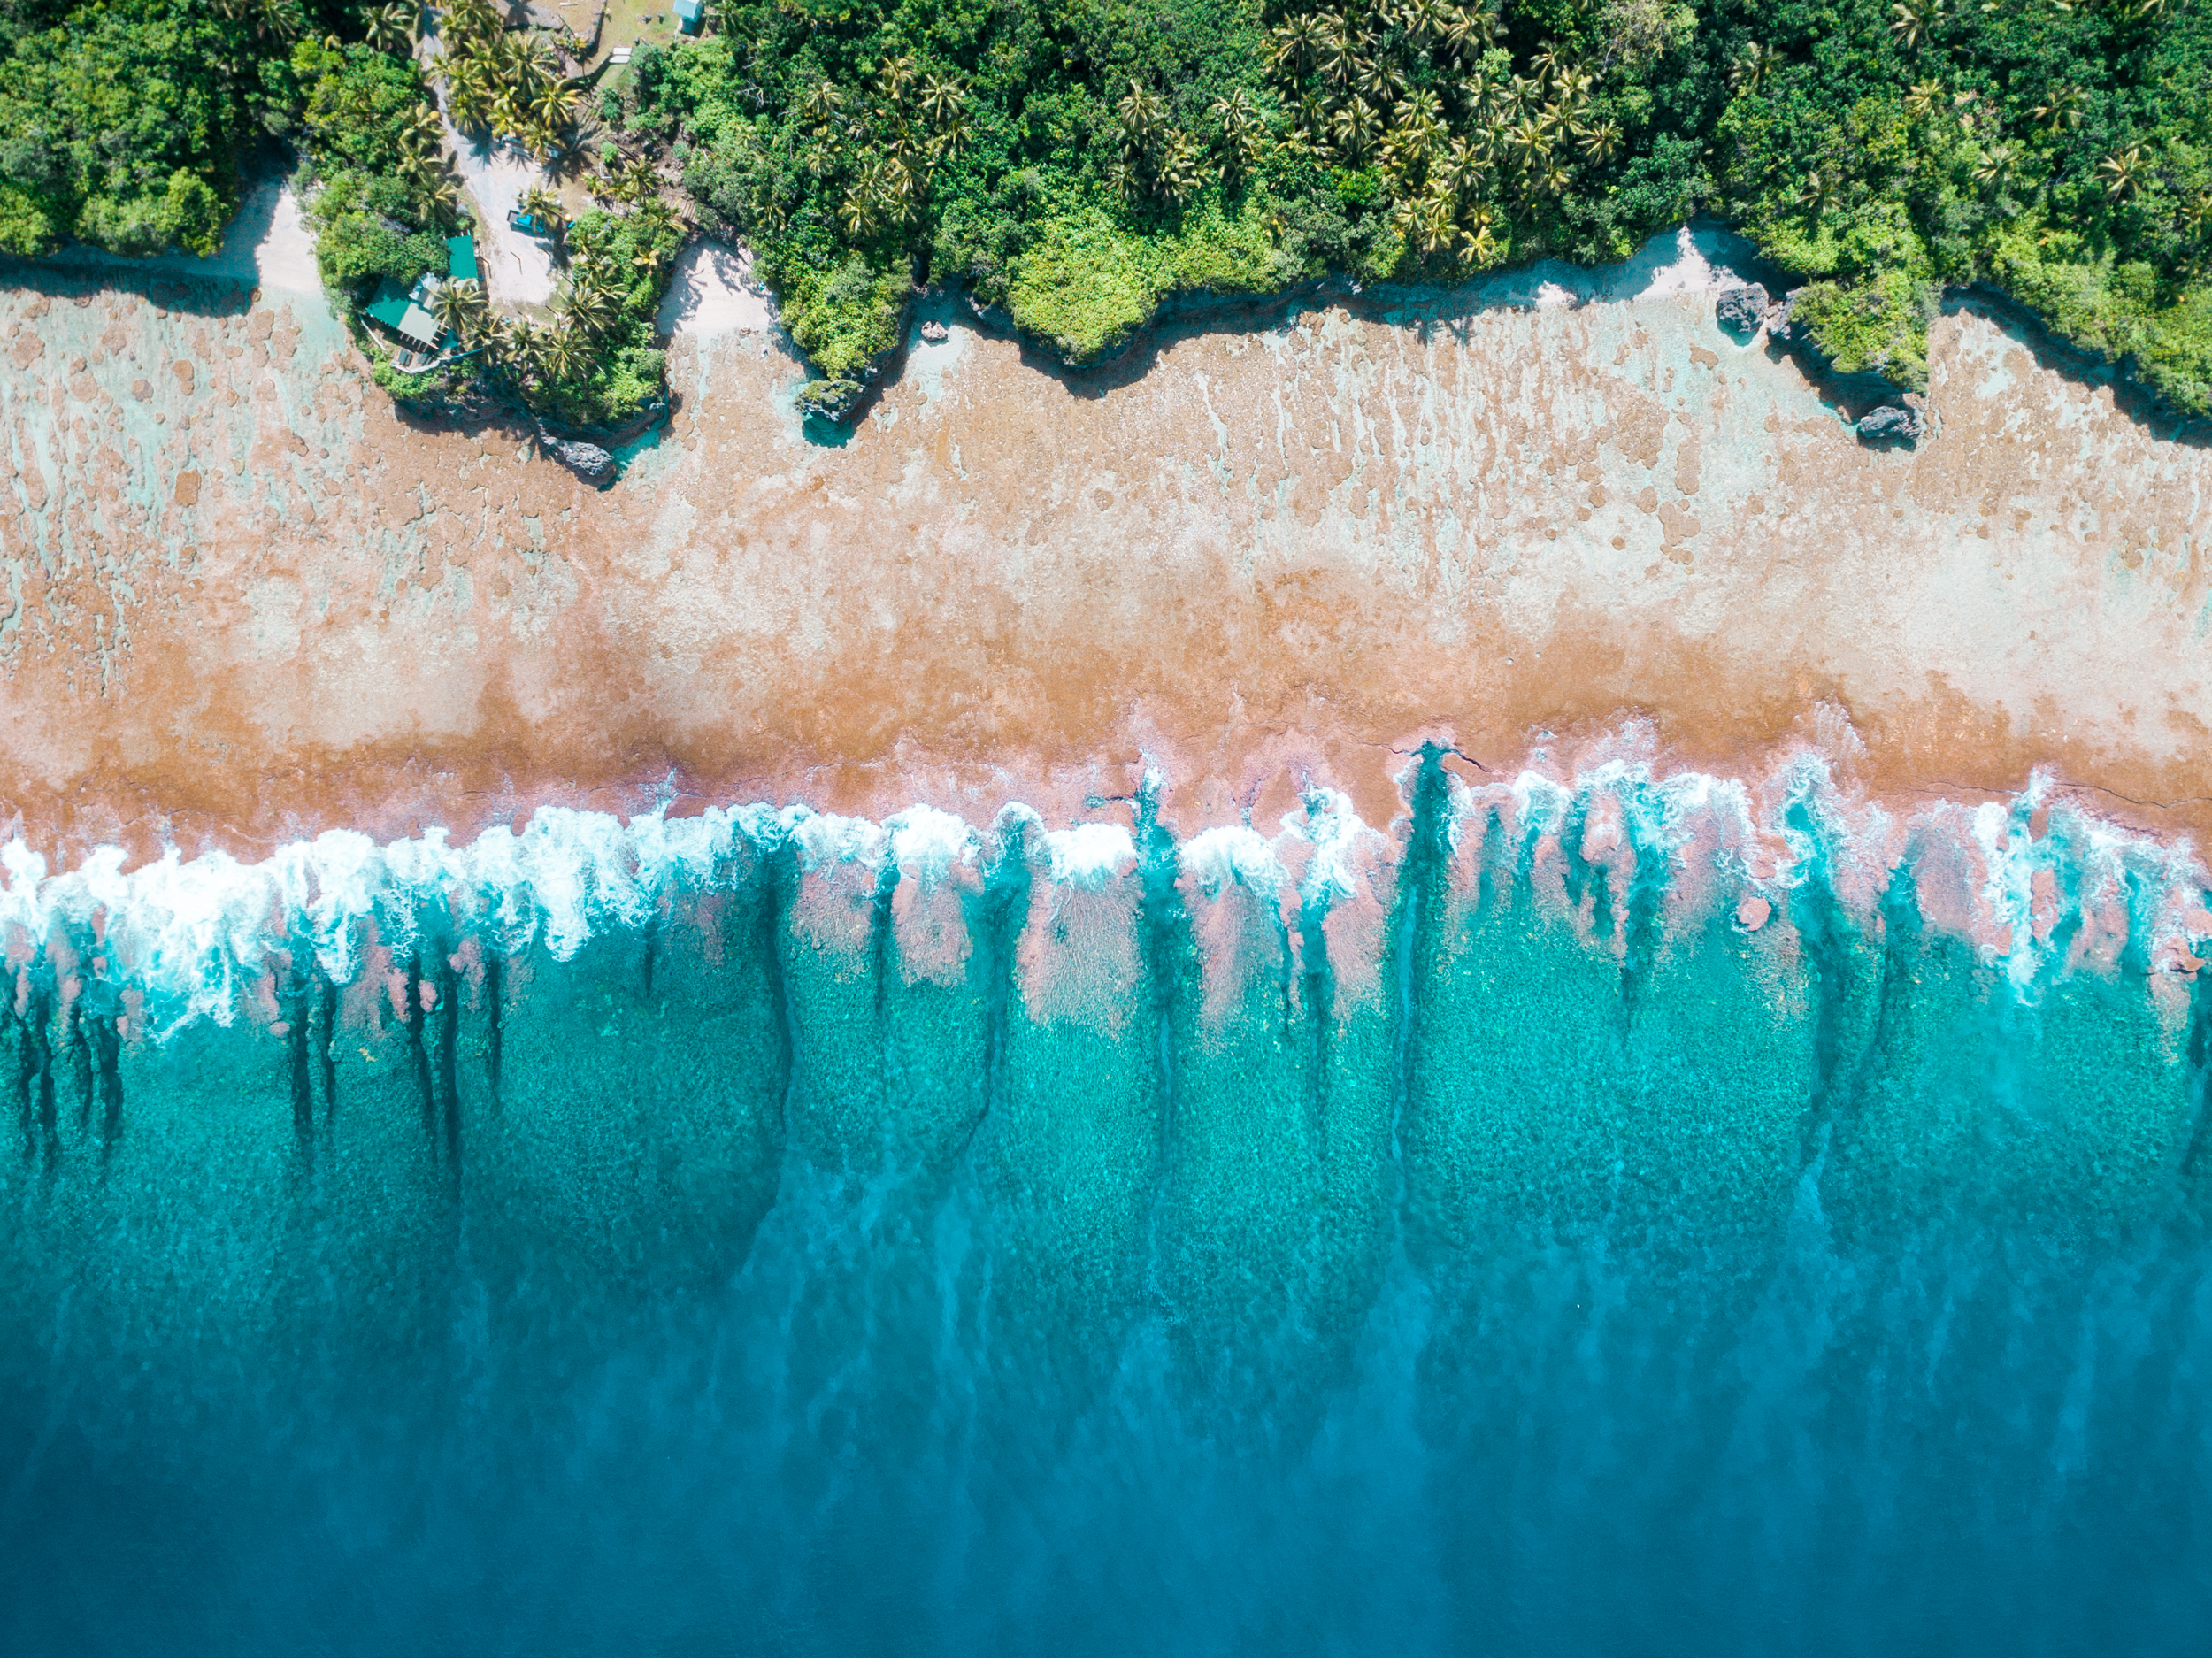   GET A NEW PERSPECTIVE    WITH AERIAL PHOTOGRAPHY  